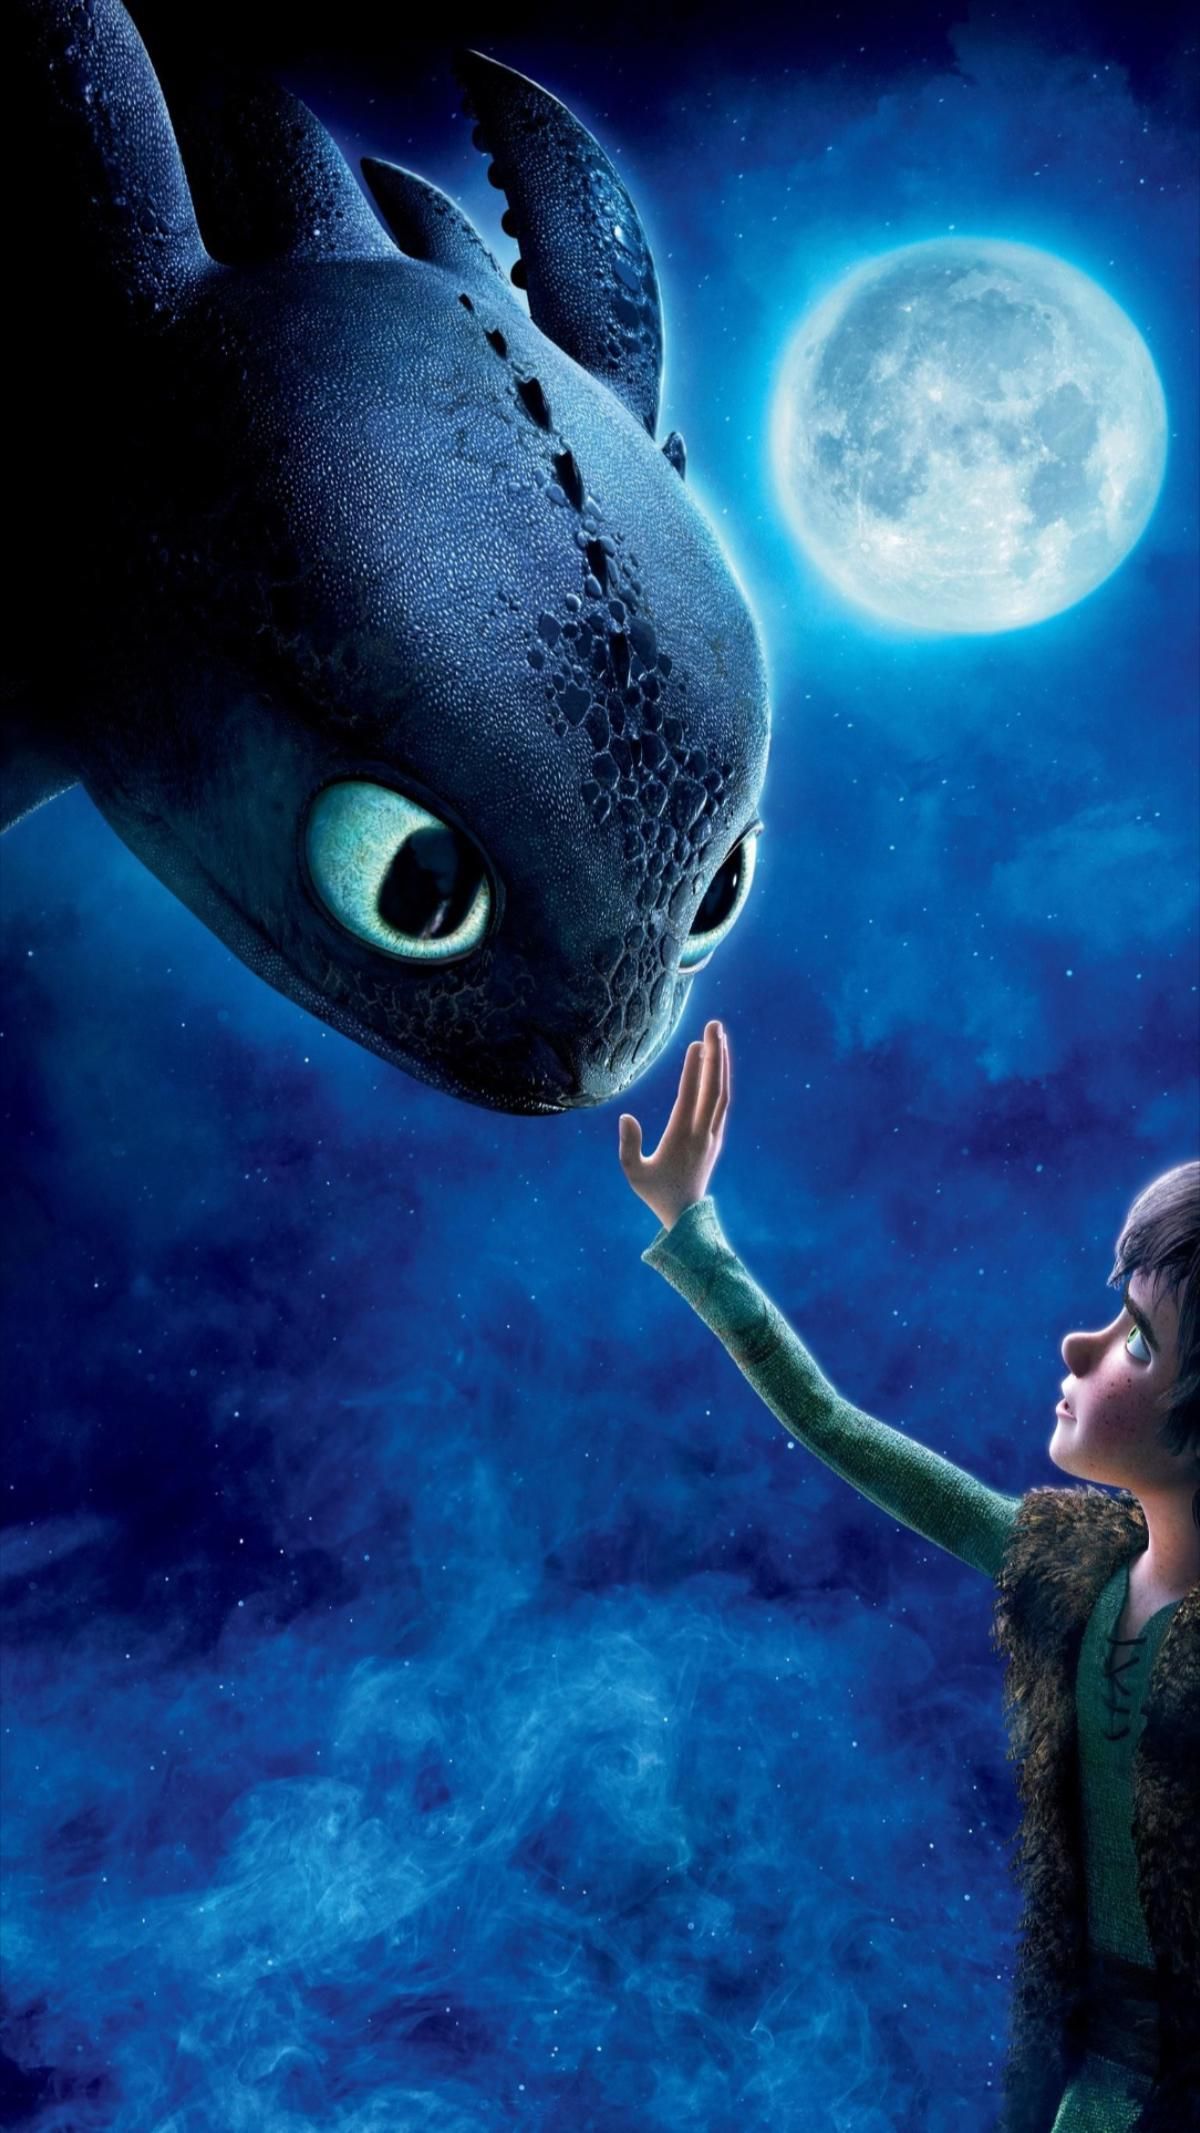 How to Train your Dragon phone wallpaper. How train your dragon, How to train your dragon, How to train dragon